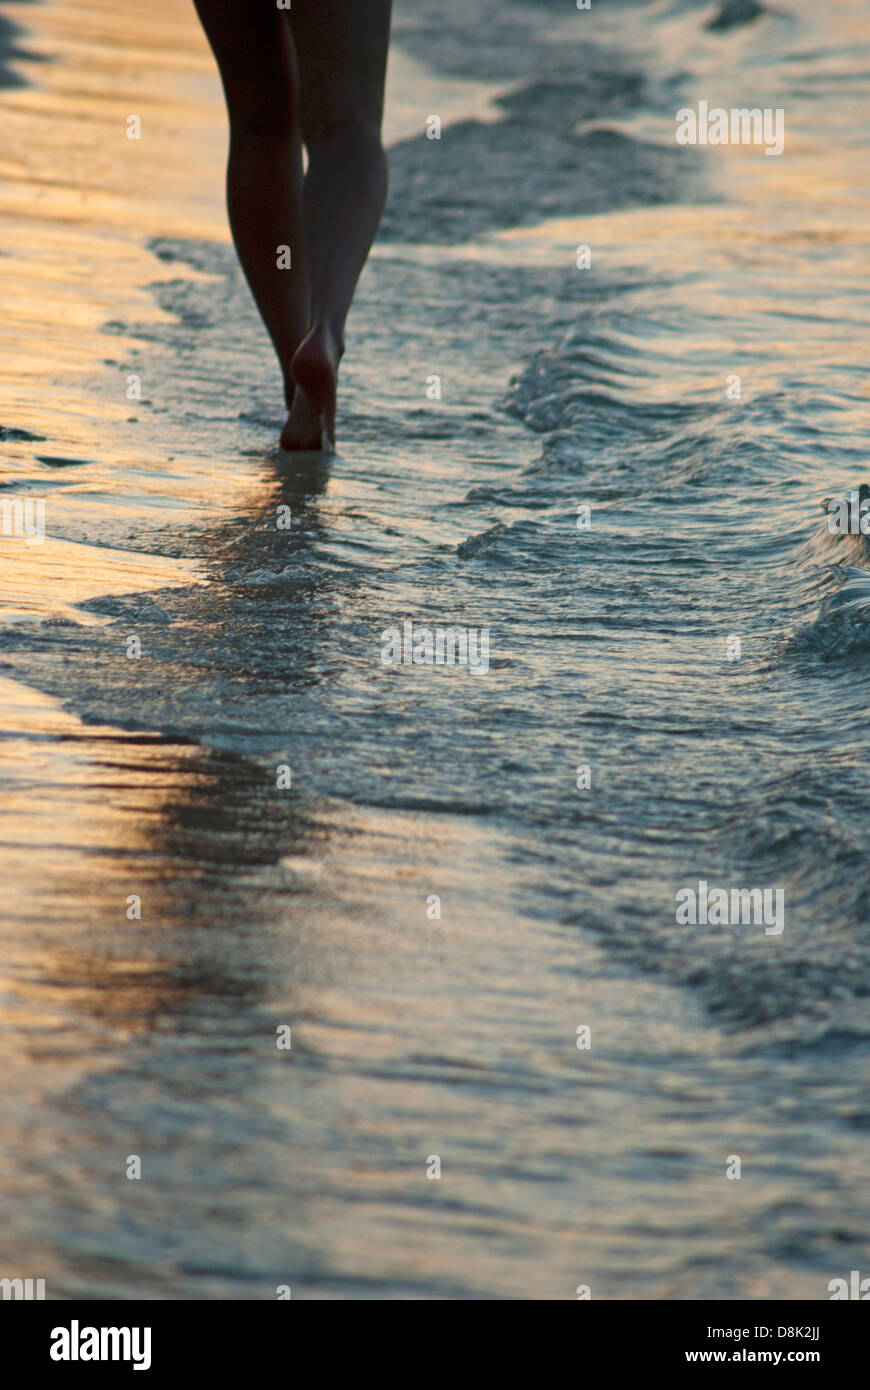 Woman walking by the edge of water on the beach Stock Photo